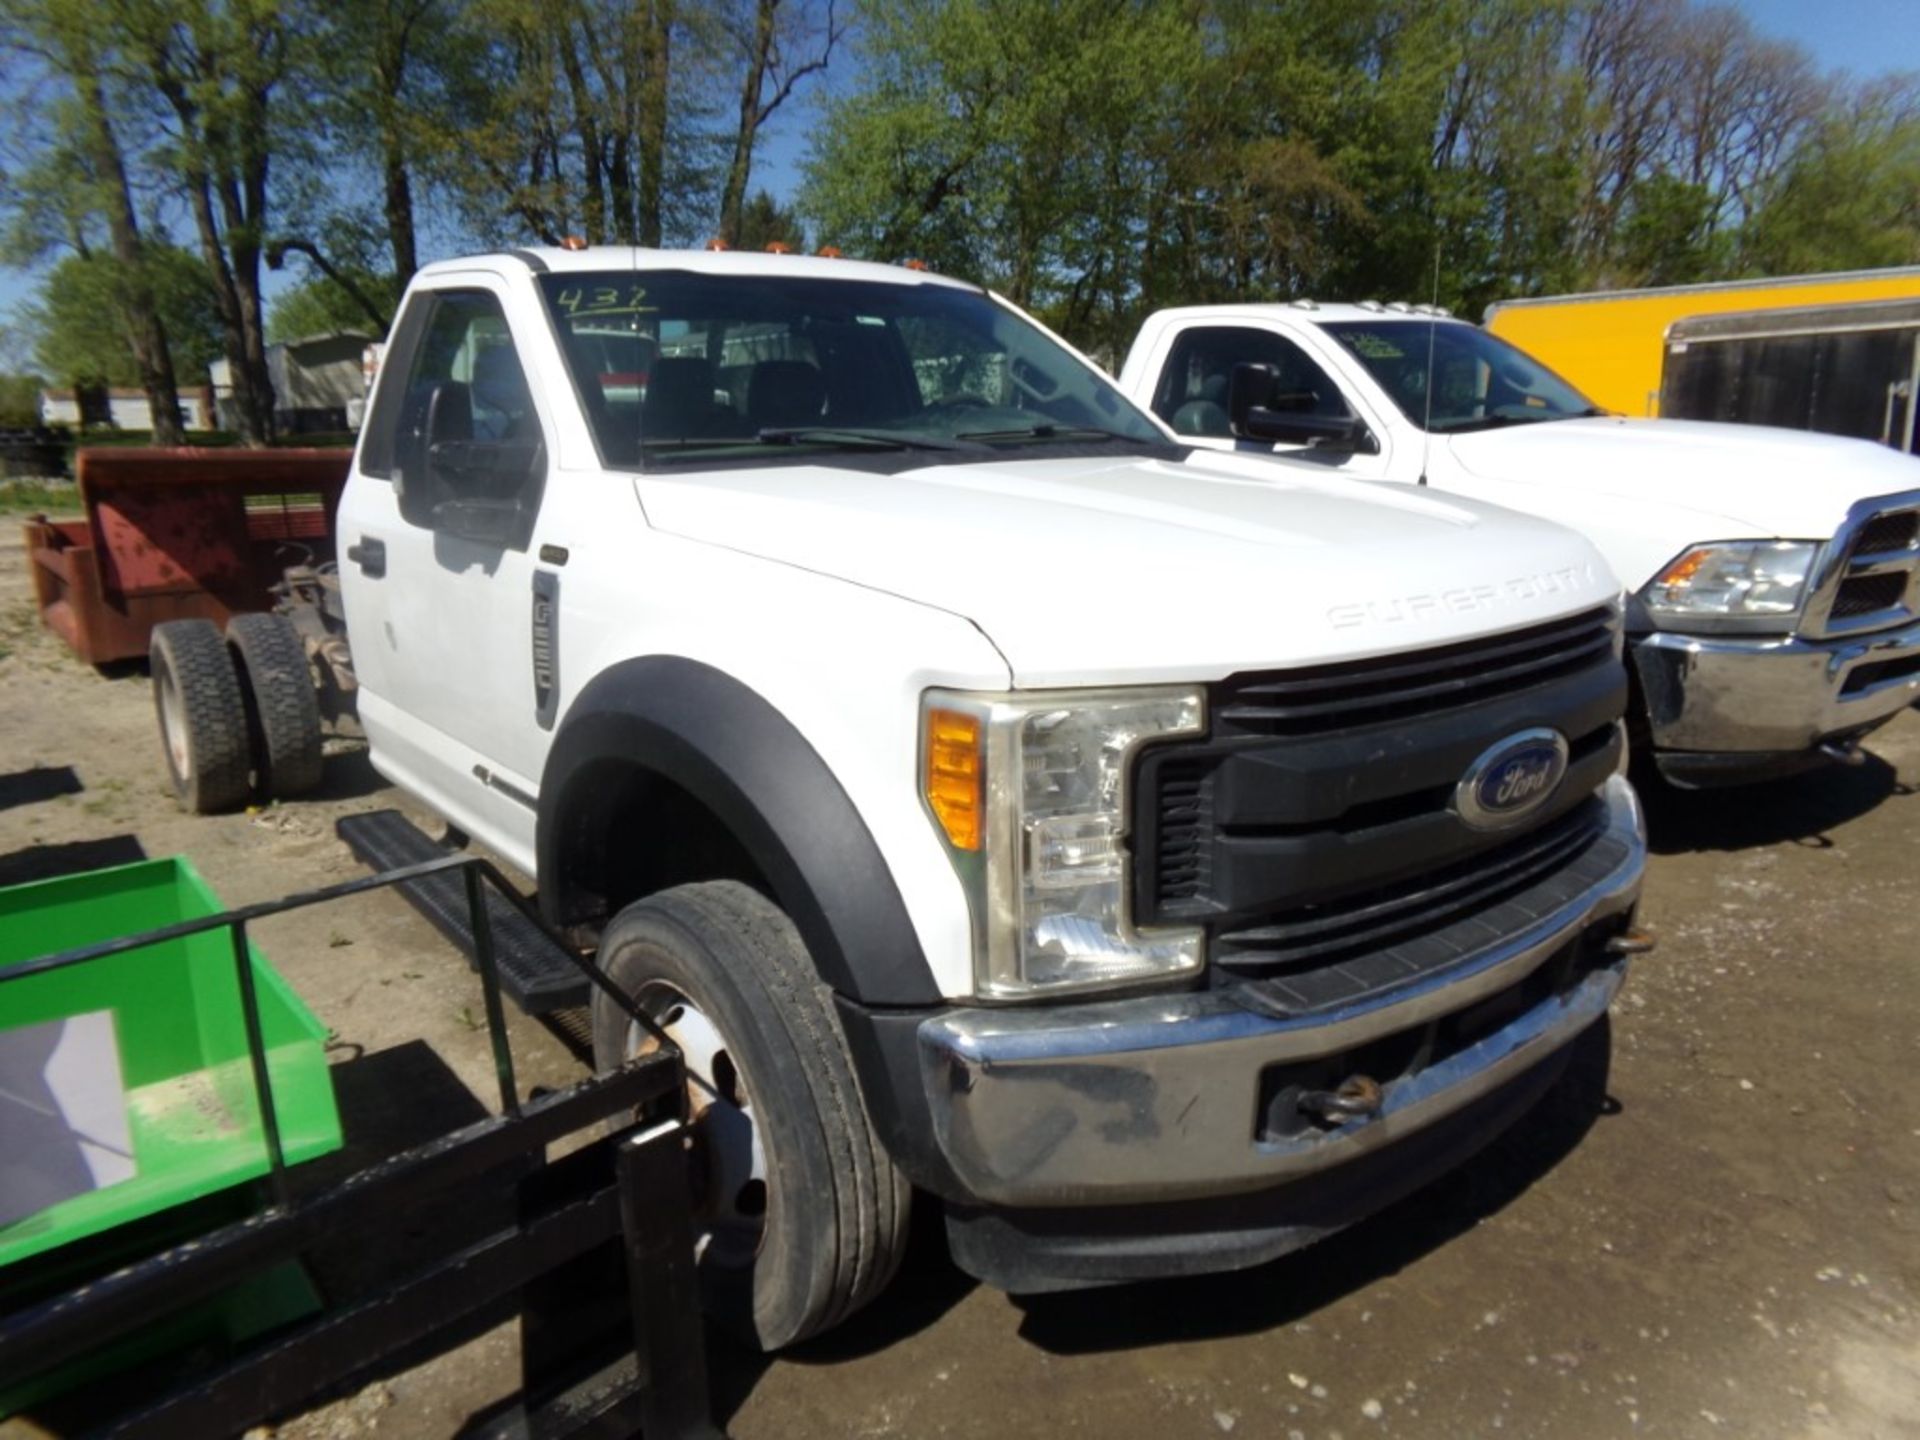 2017 Ford F-550, 6.7 L Power Stroke Diesel, Reg Cab And Chassis, 2 WD, 158,201 Mi, NOT RUNNING, - Image 4 of 5